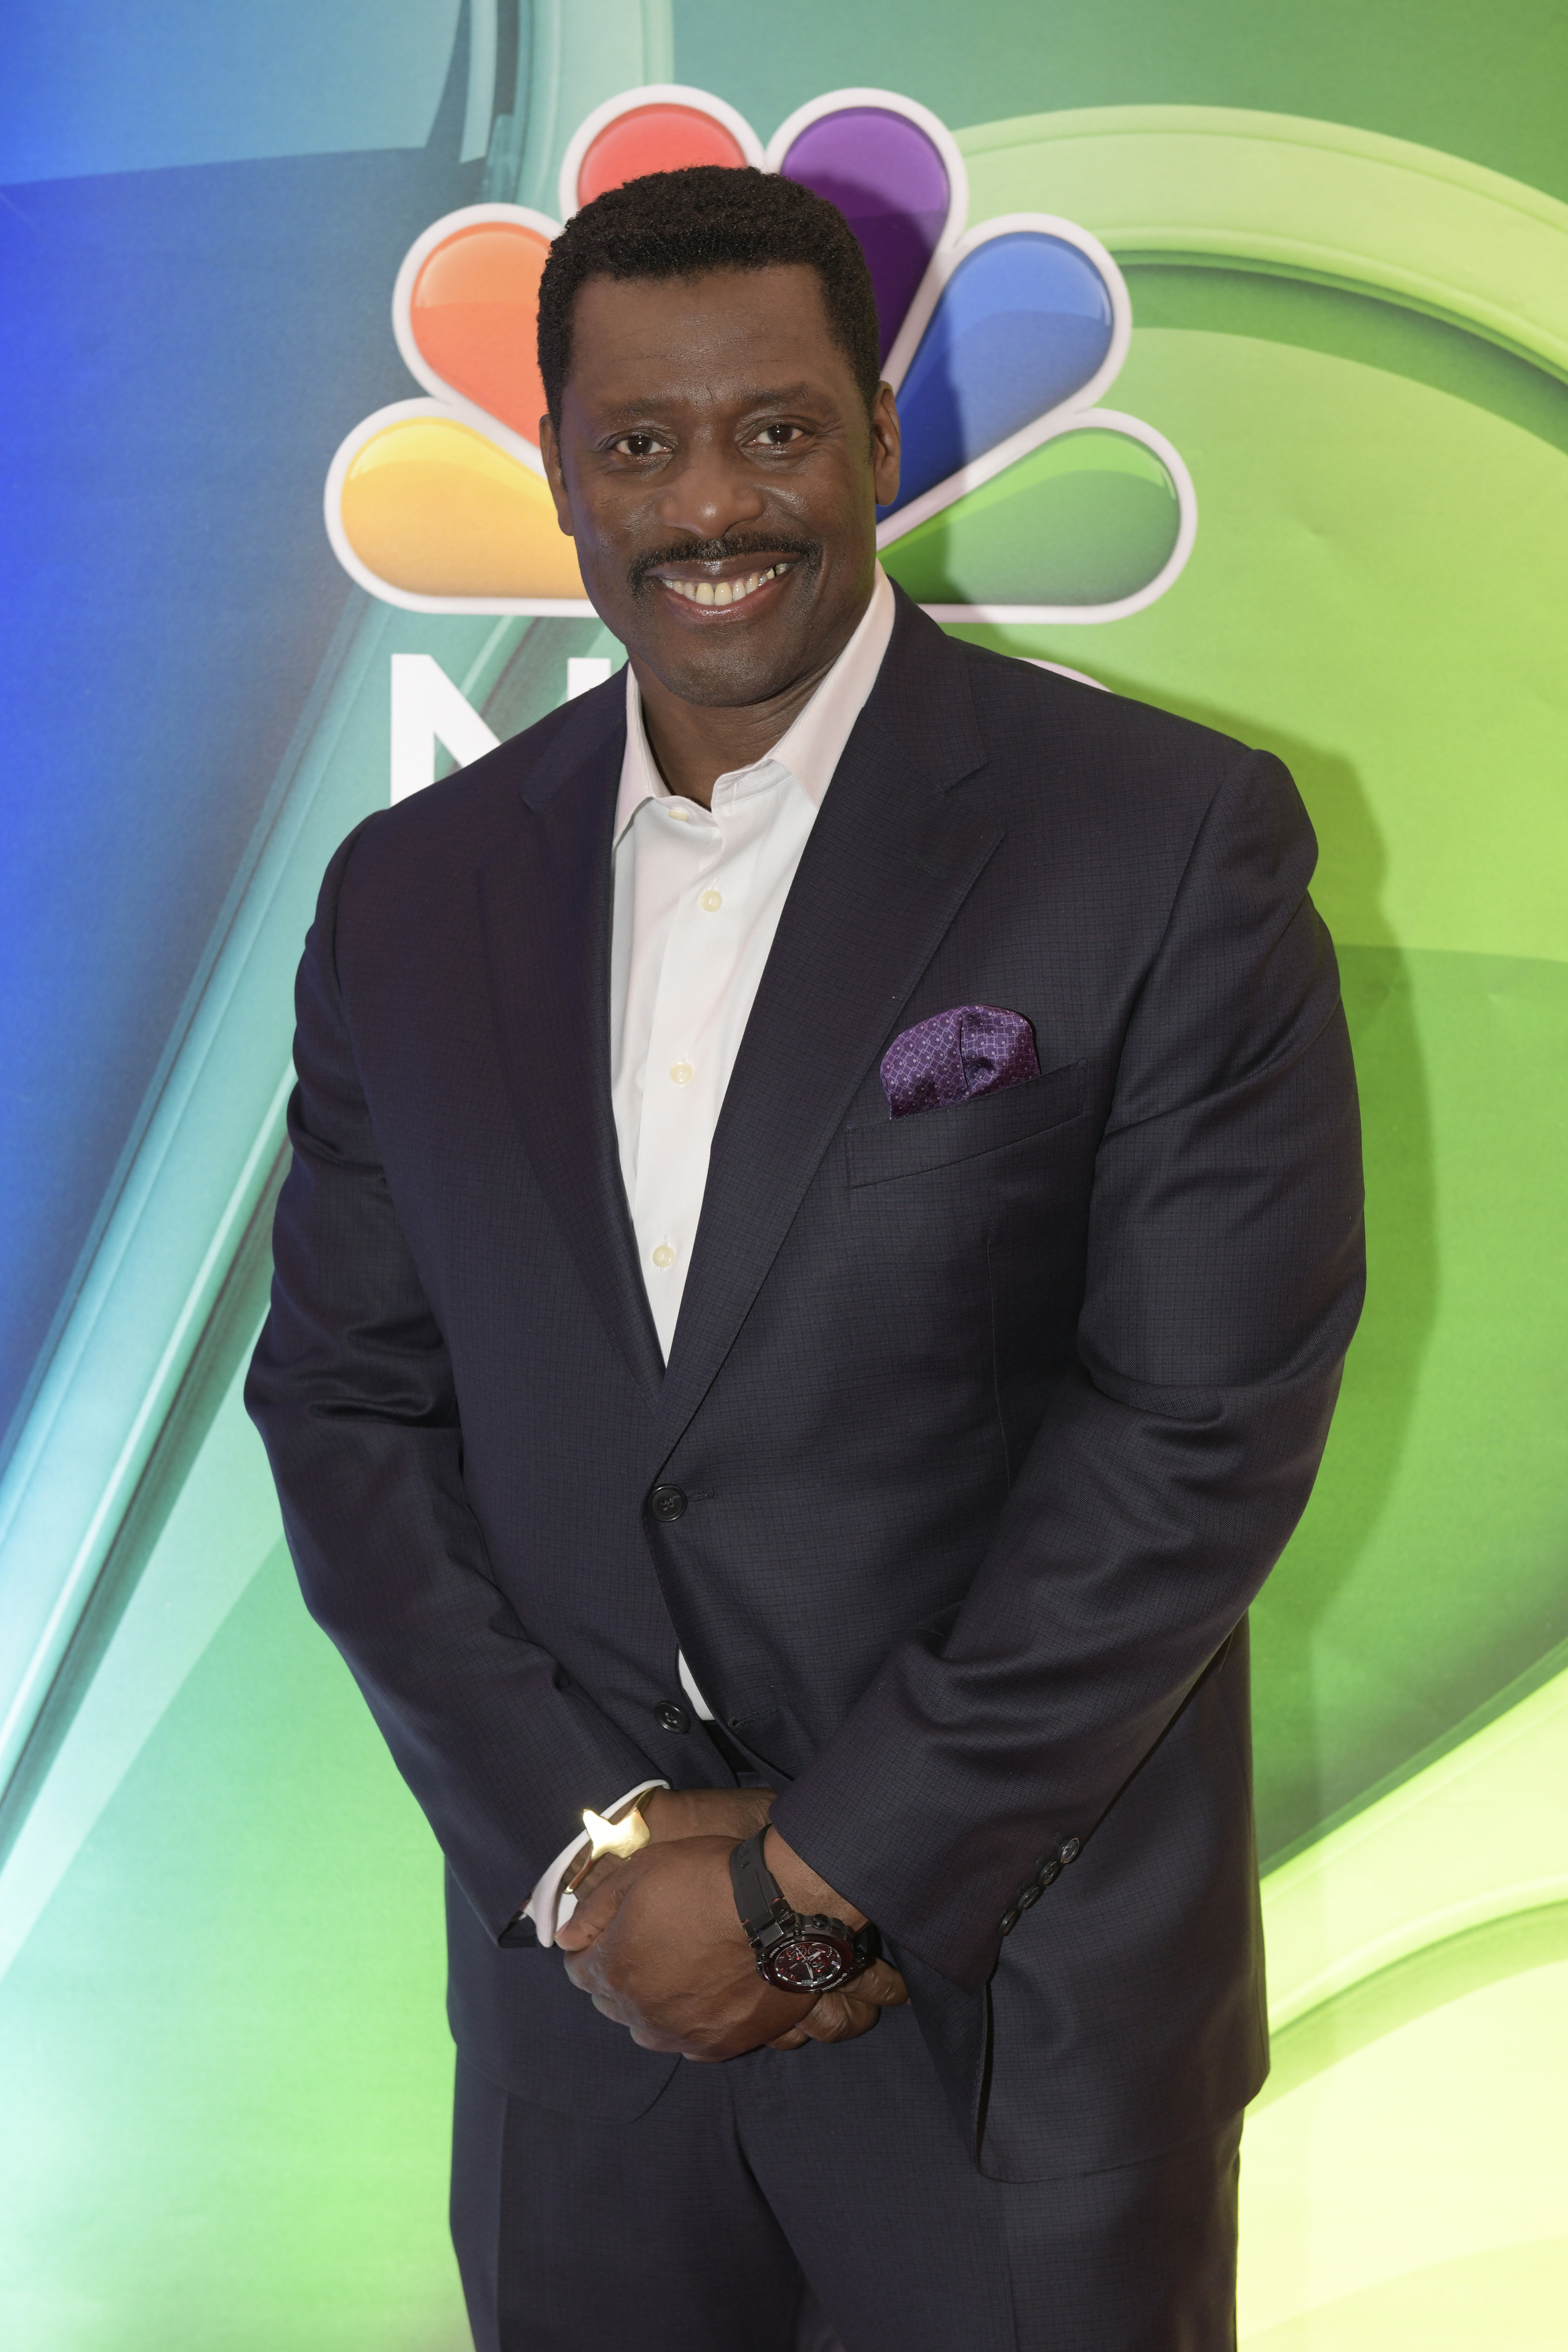 Eamonn Walker may reprise his role as Wallace Boden in future seasons of the show